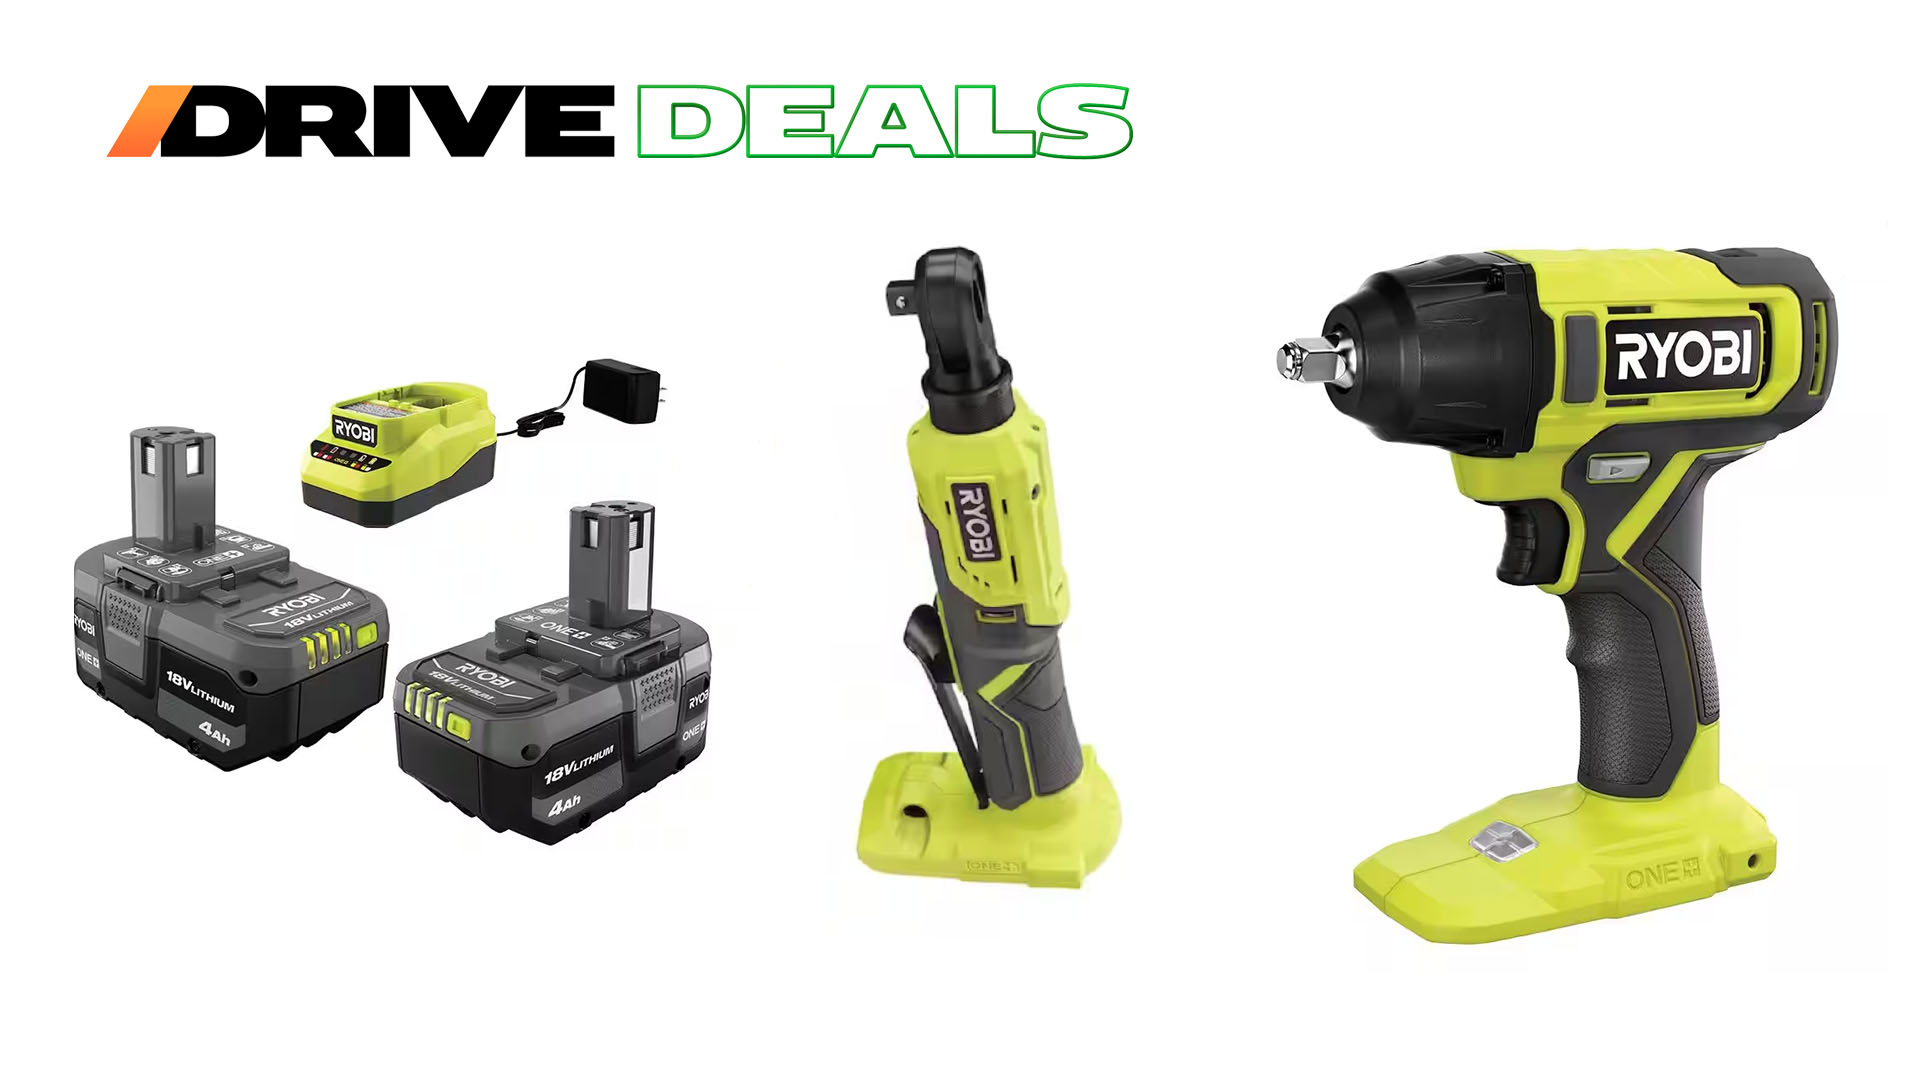 Home Depot's Wild Ryobi Day Deals Are Back The Drive